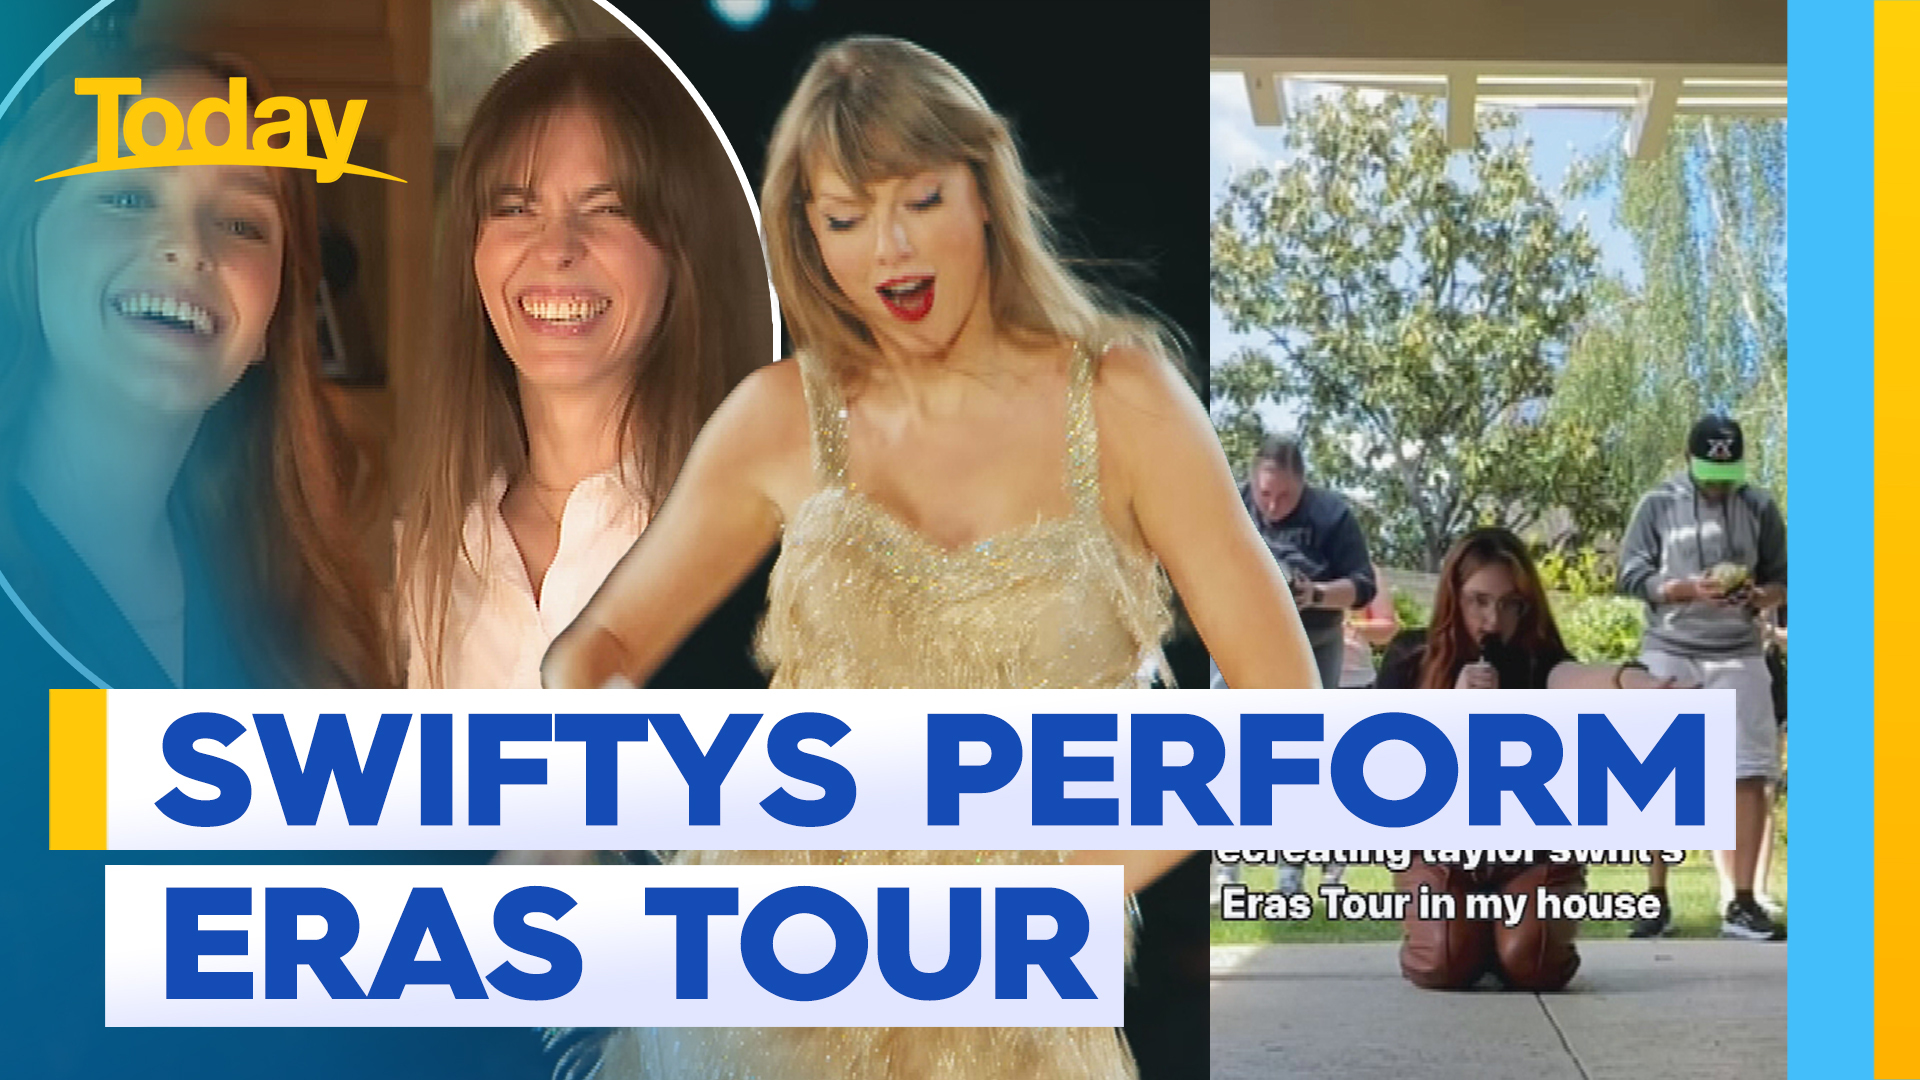 Swiftys perform their own budget version of the epic Eras Tour